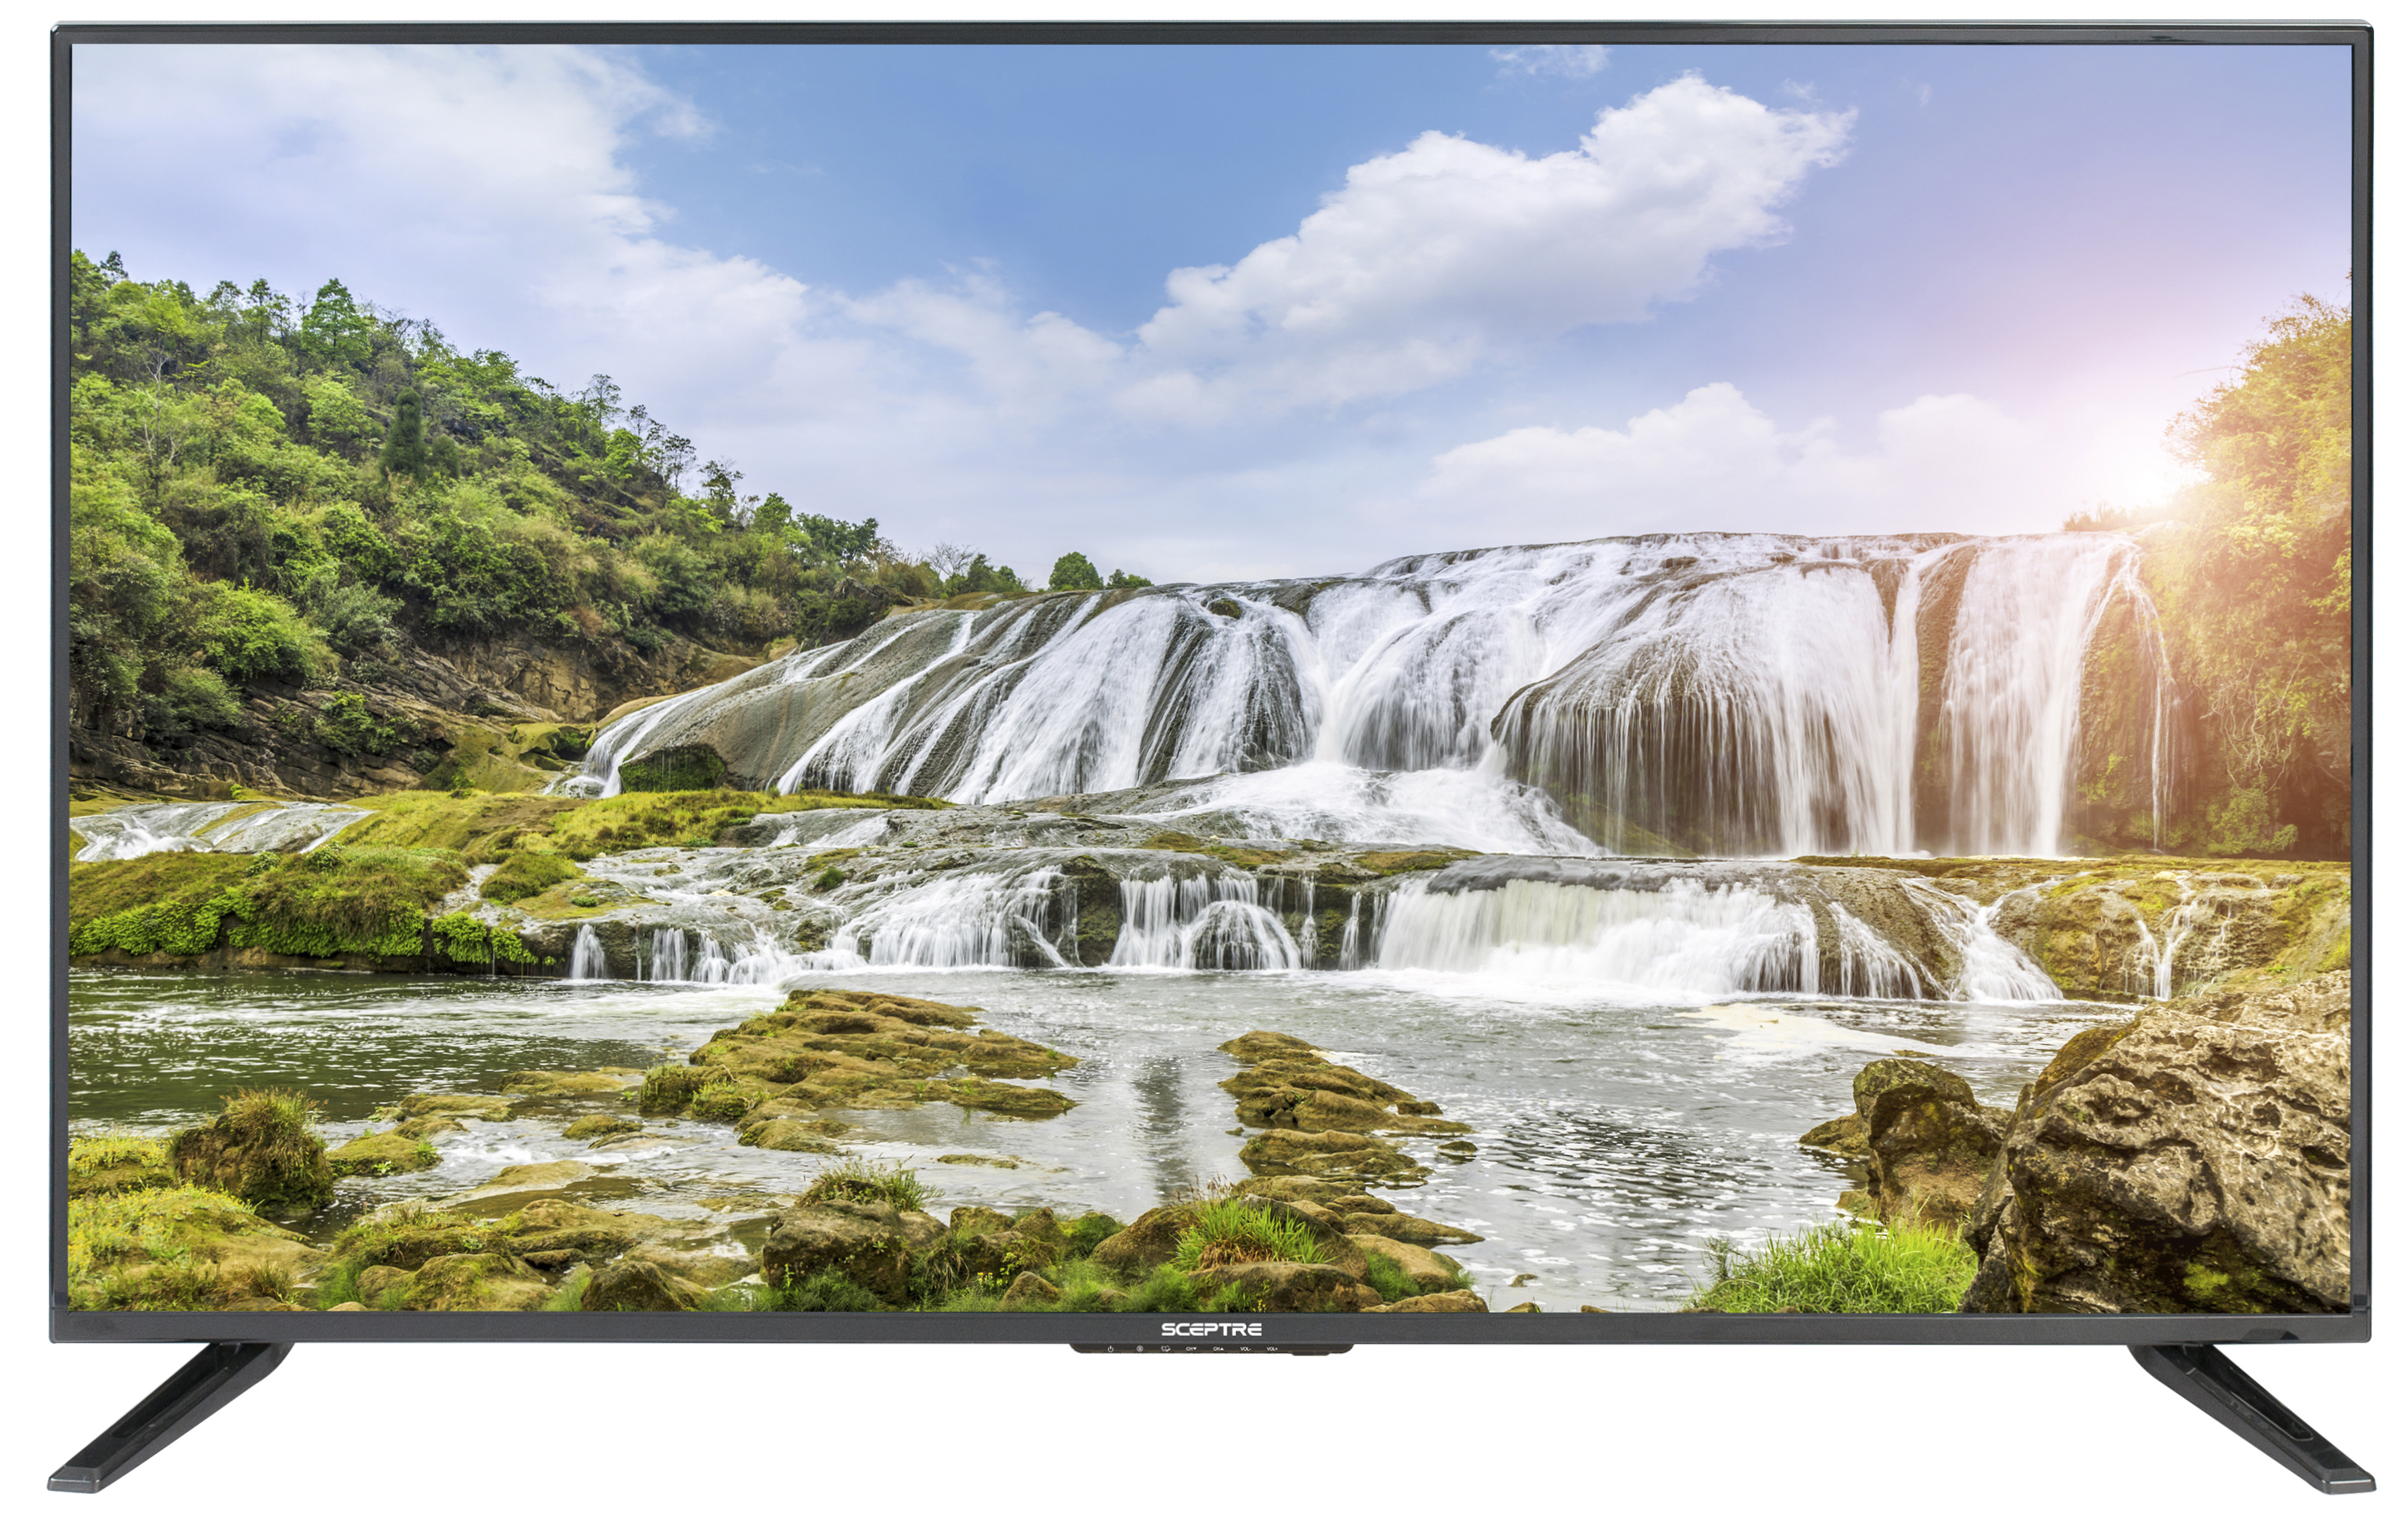 Sceptre 43-in Class FHD LED TV...